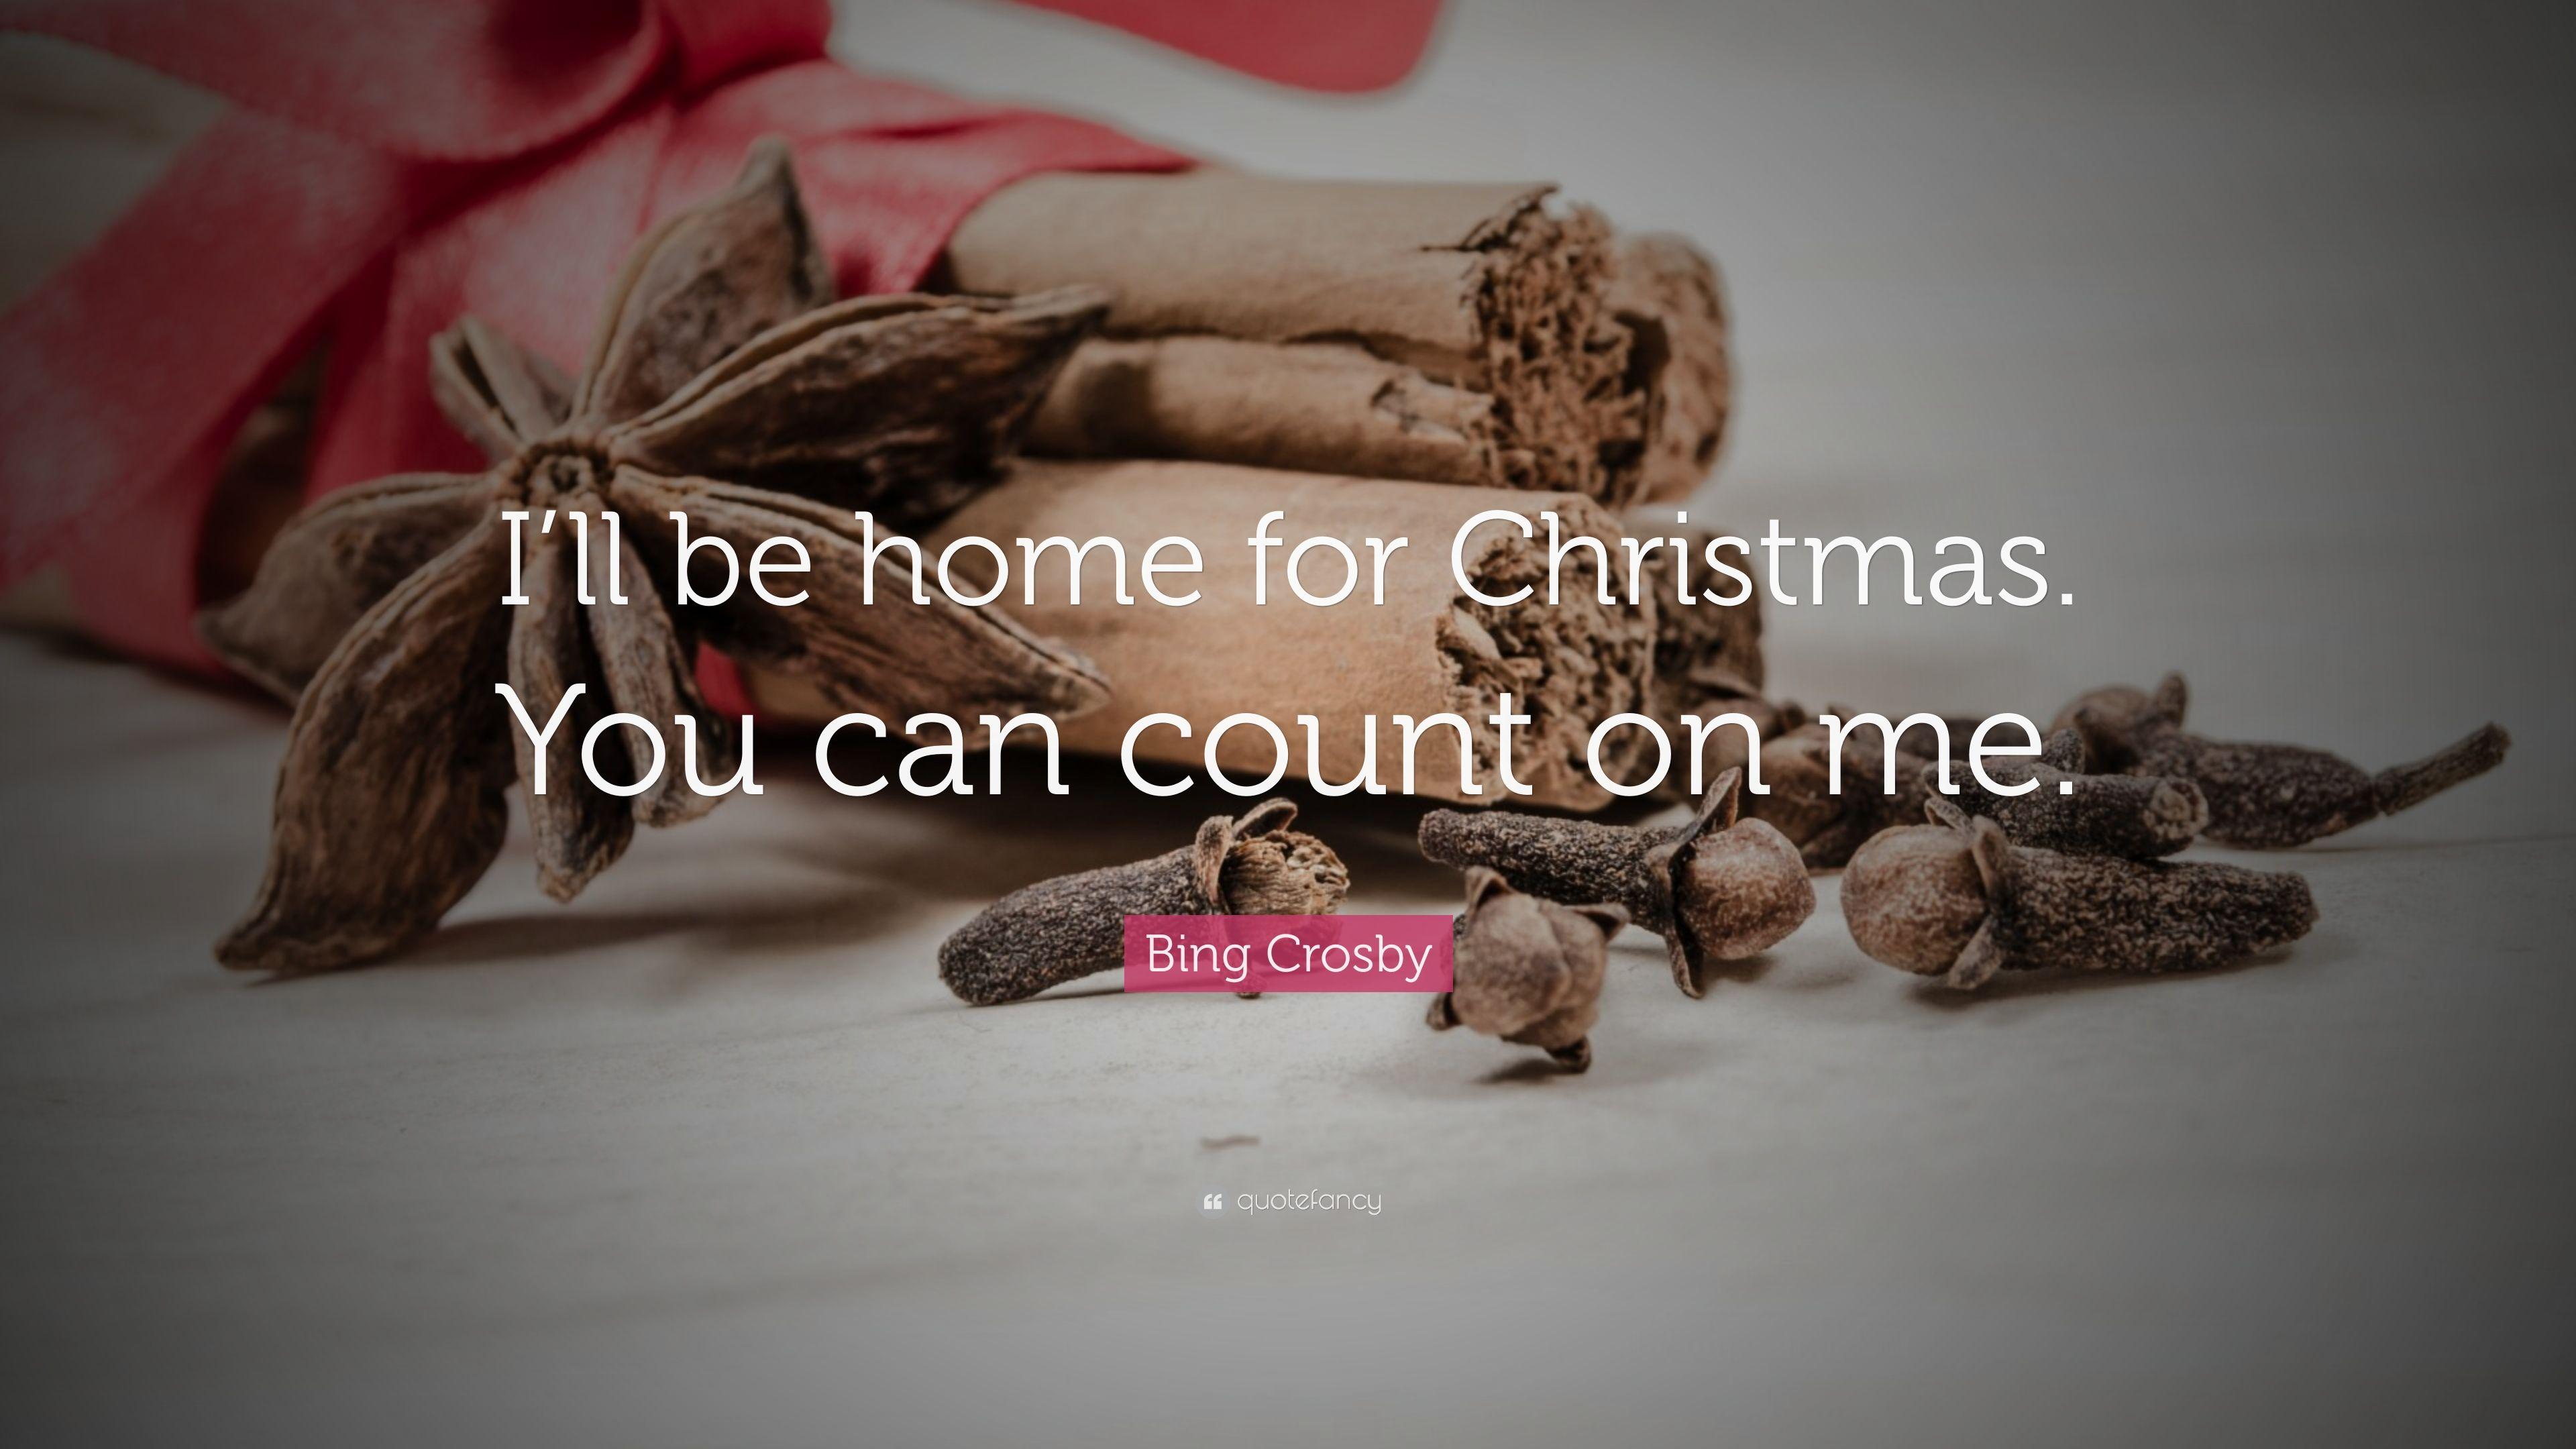 Bing Crosby Quote: “I'll be home for Christmas. You can count on me